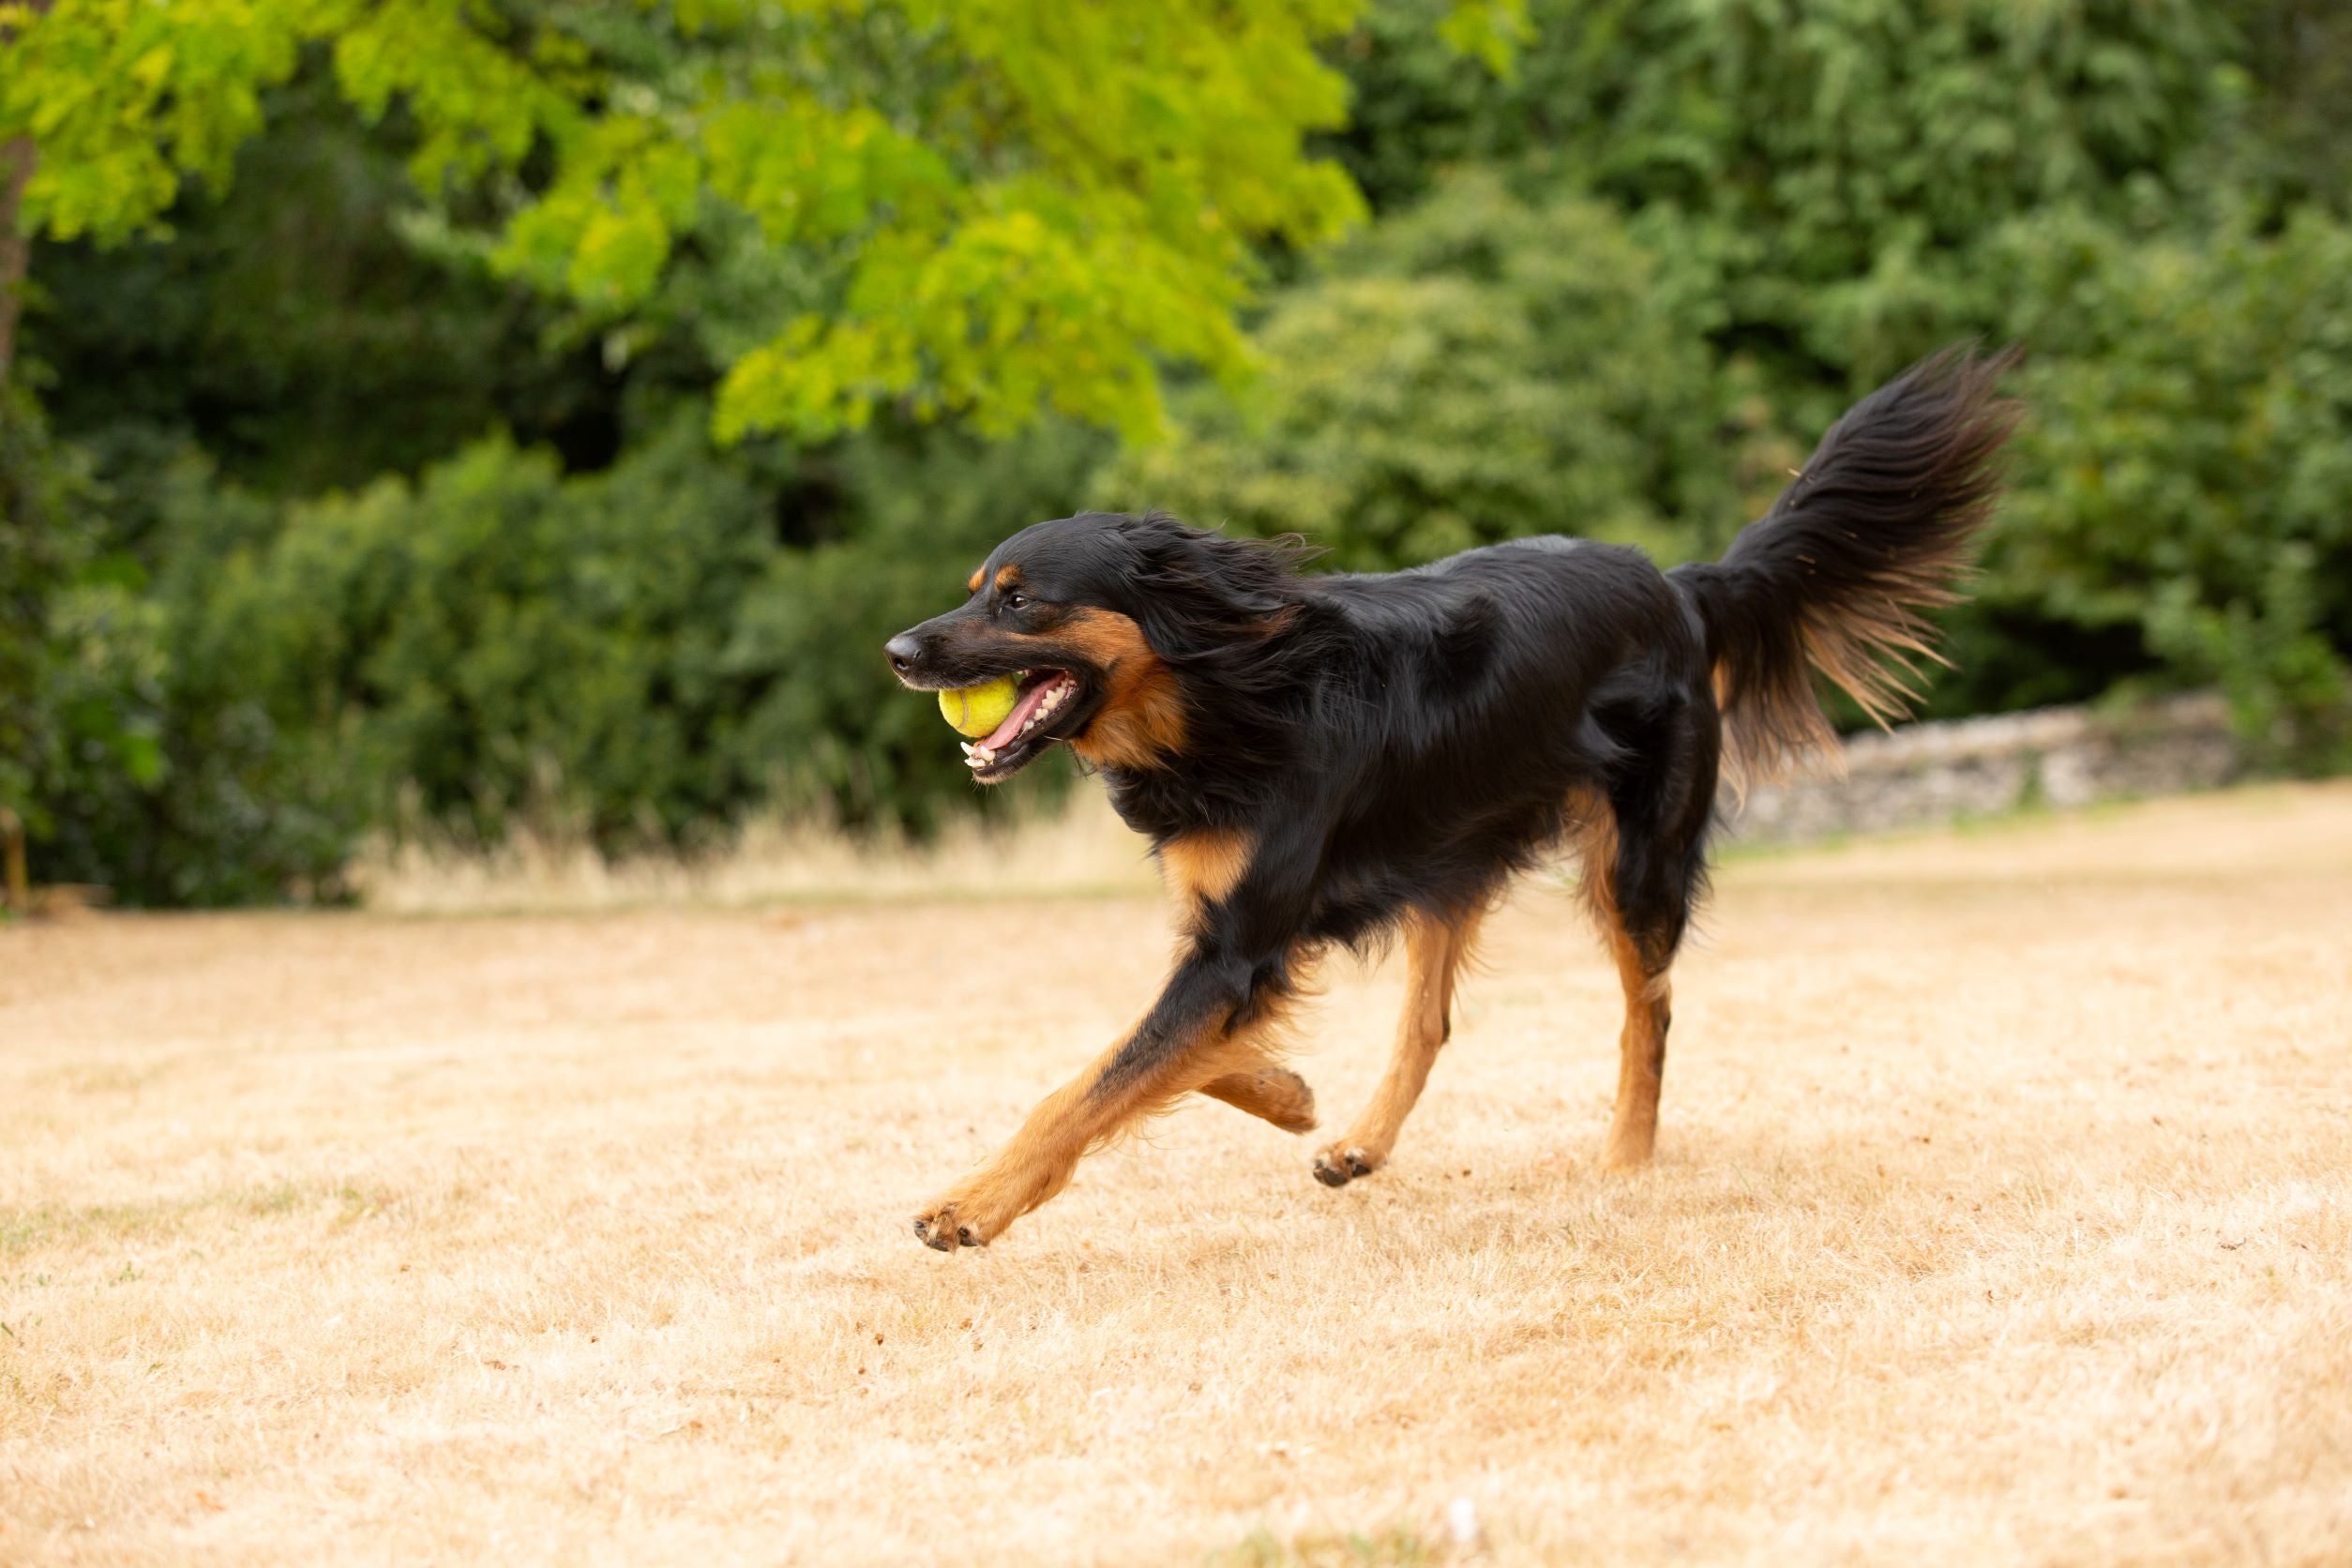 Black and brown dog running on grass with a ball